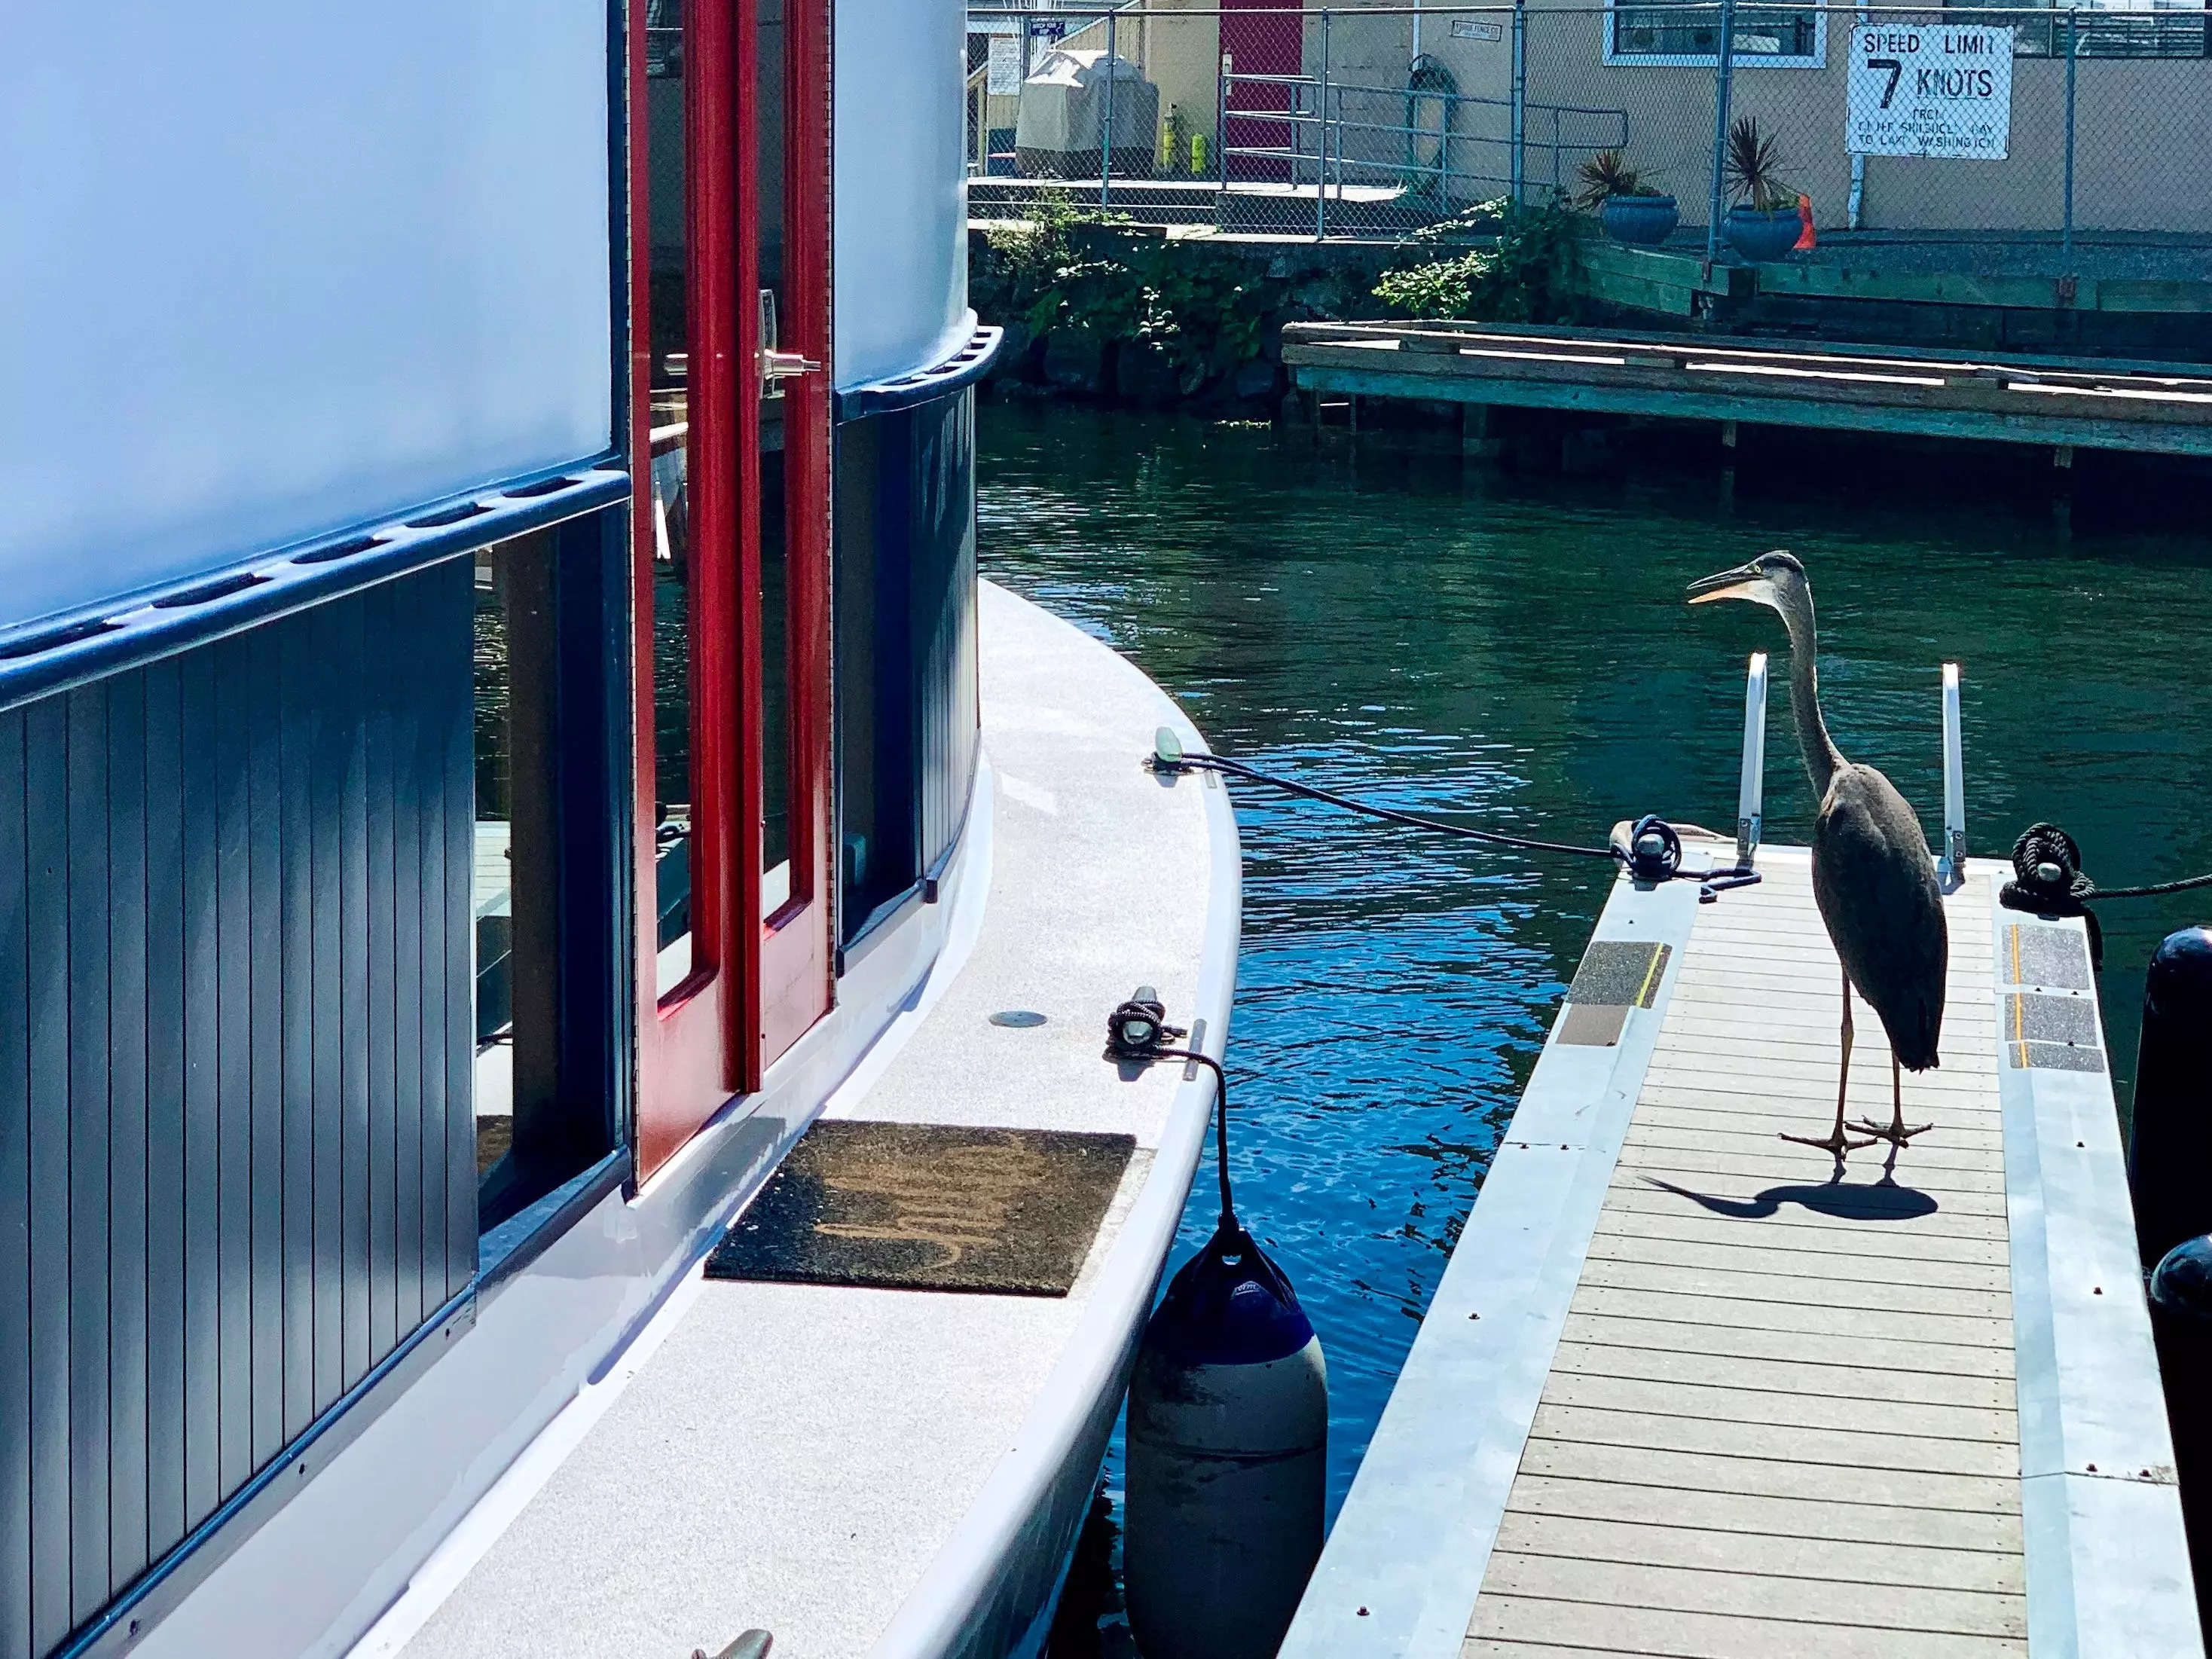 A bird standing on a dock next to a houseboat.